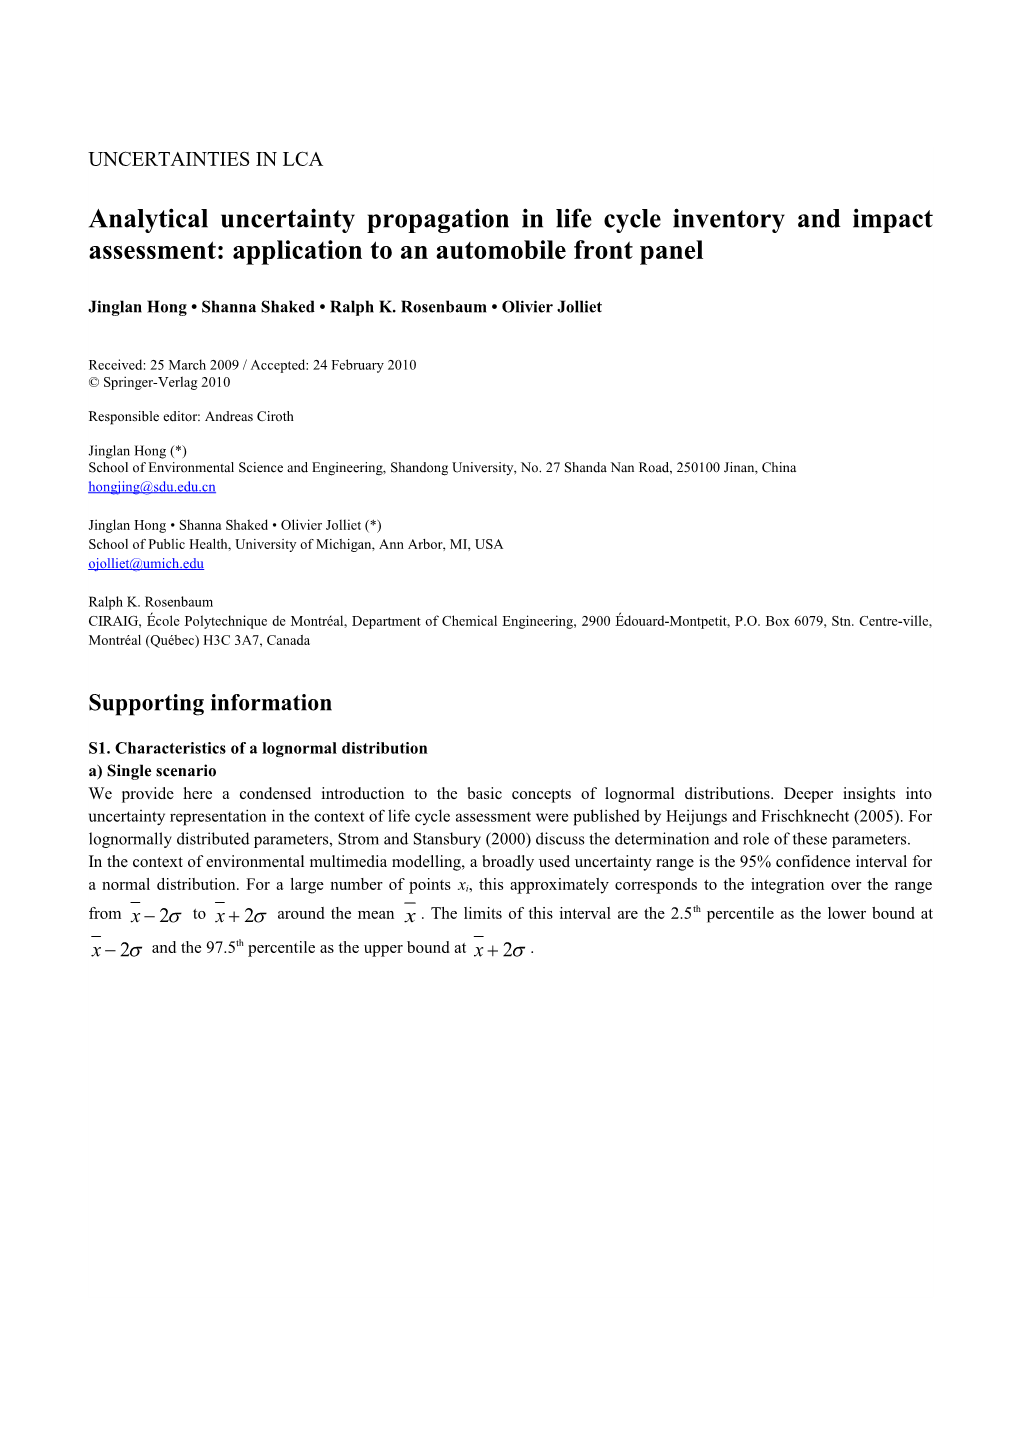 Analytical Uncertainty Propagation in Life Cycle Inventory and Impact Assessment: Application